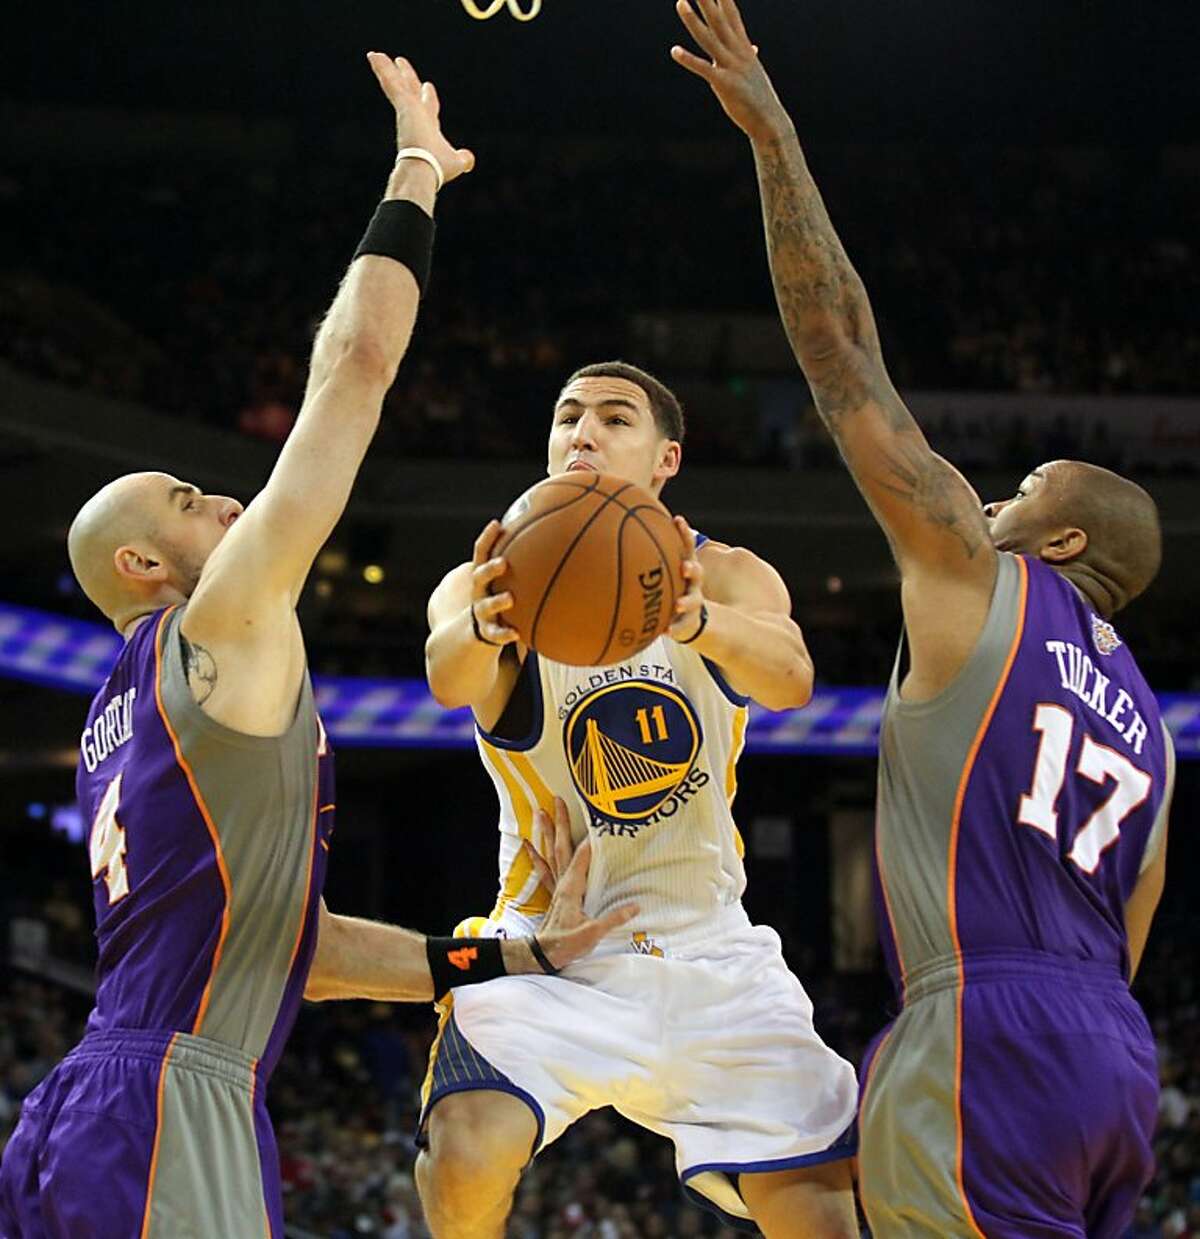 Golden State Warriors guard Klay Thompson (11) shoots between two Phoenix Suns defenders in the first half of their NBA basketball game Saturday, Feb. 2, 2013 at the Oakland Coliseum in Oakland California.